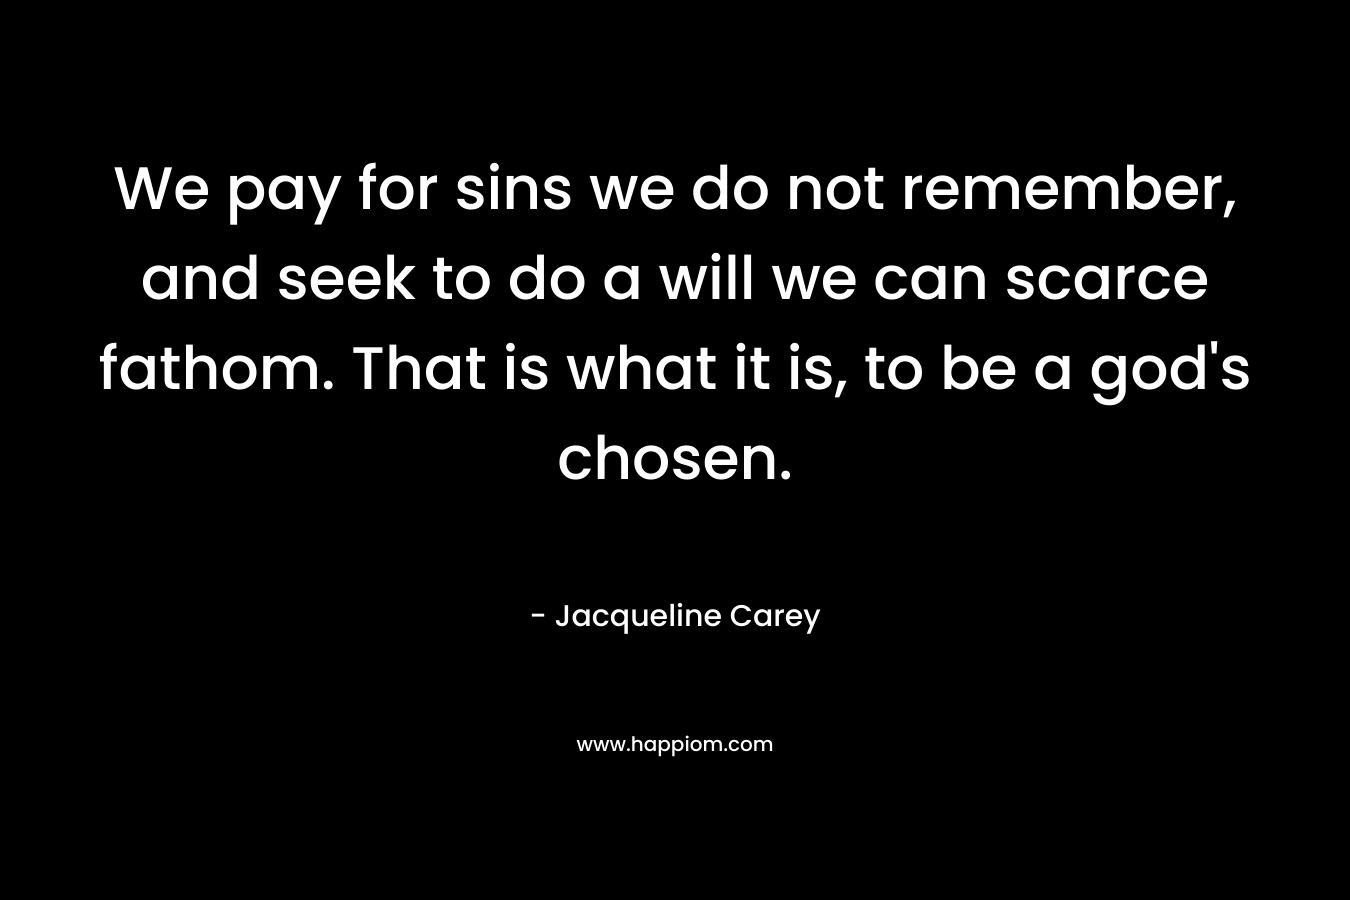 We pay for sins we do not remember, and seek to do a will we can scarce fathom. That is what it is, to be a god’s chosen.  – Jacqueline Carey